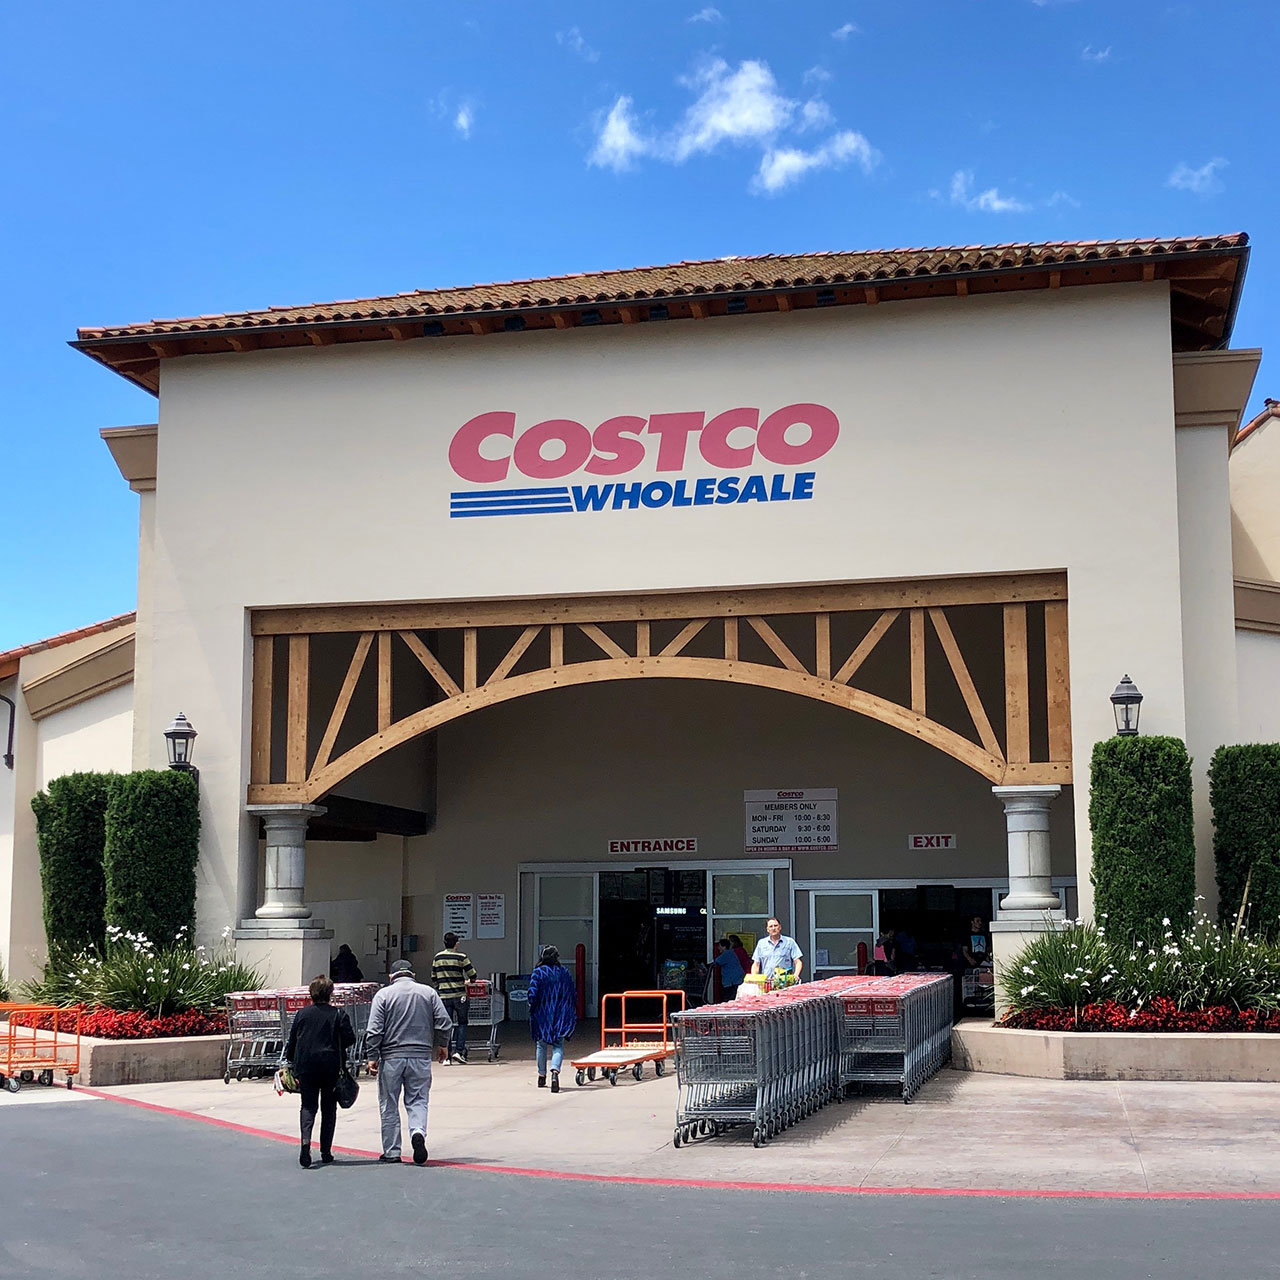 10 Costco Items That Have The Highest Ratings And Reviews: 'So Good' -  SHEfinds